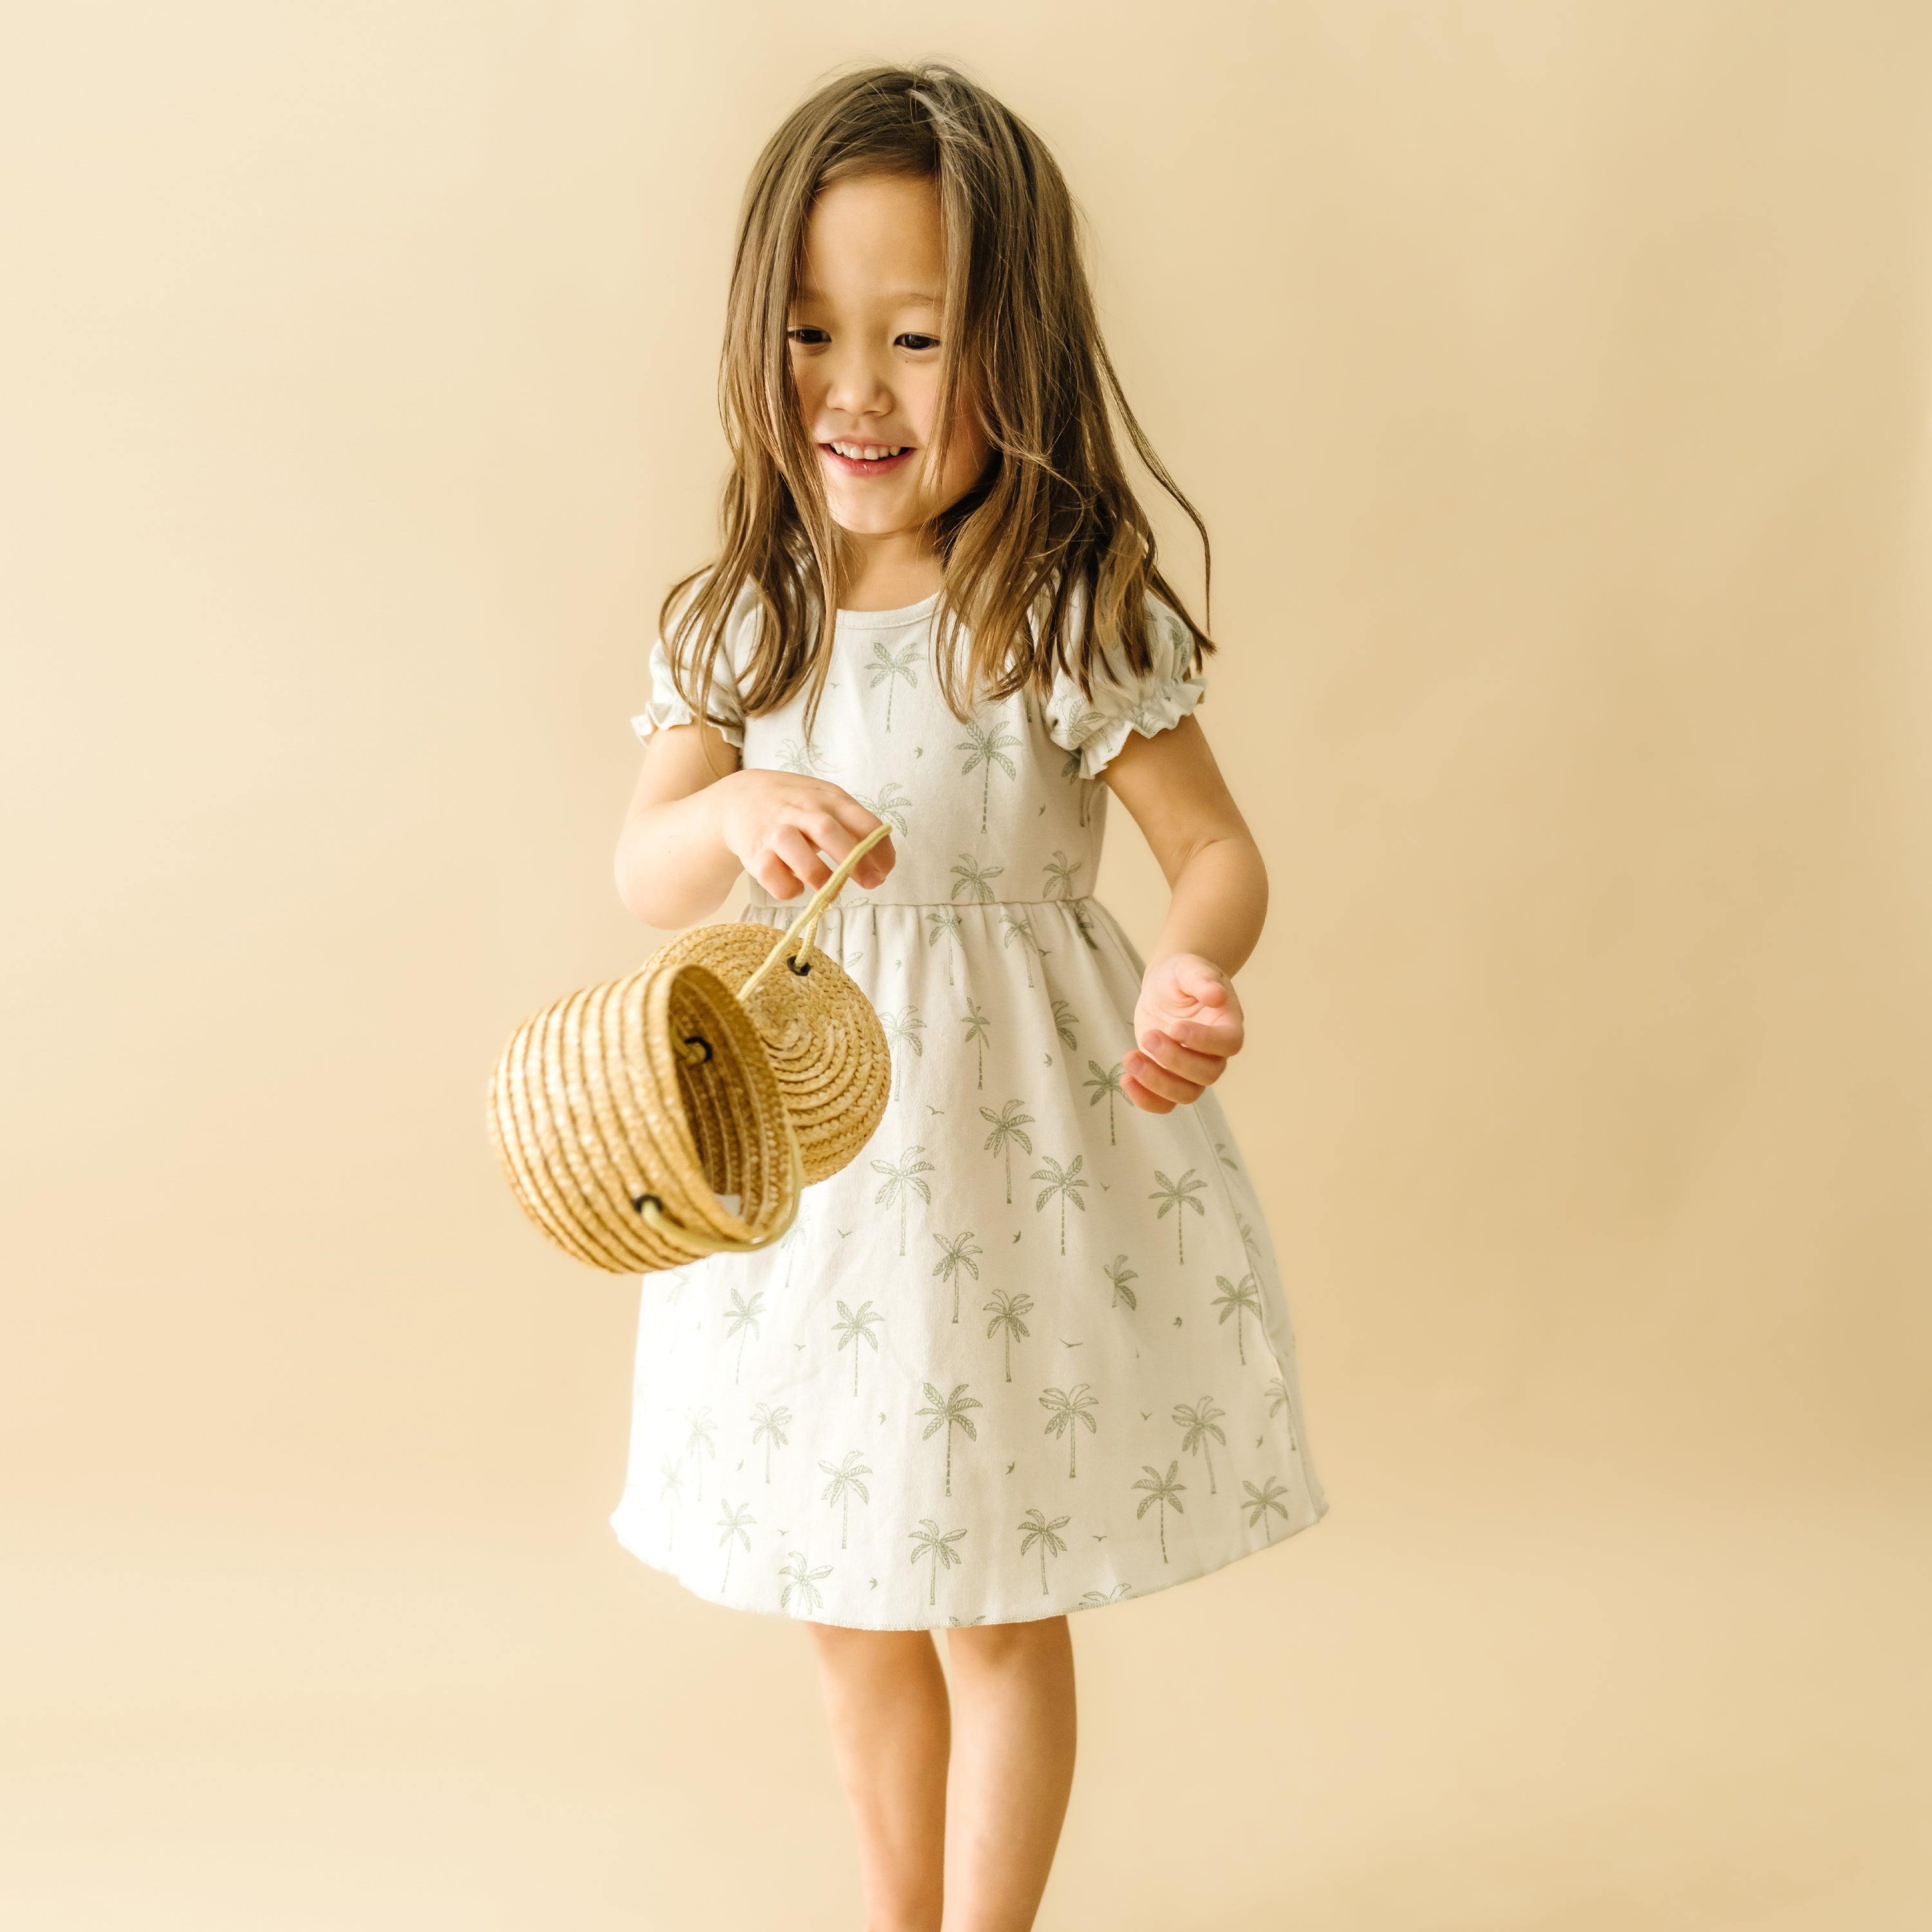 A joyful young girl in a white dress with Organic Kids palm prints, holding a wicker basket, playfully dancing against a soft beige background.